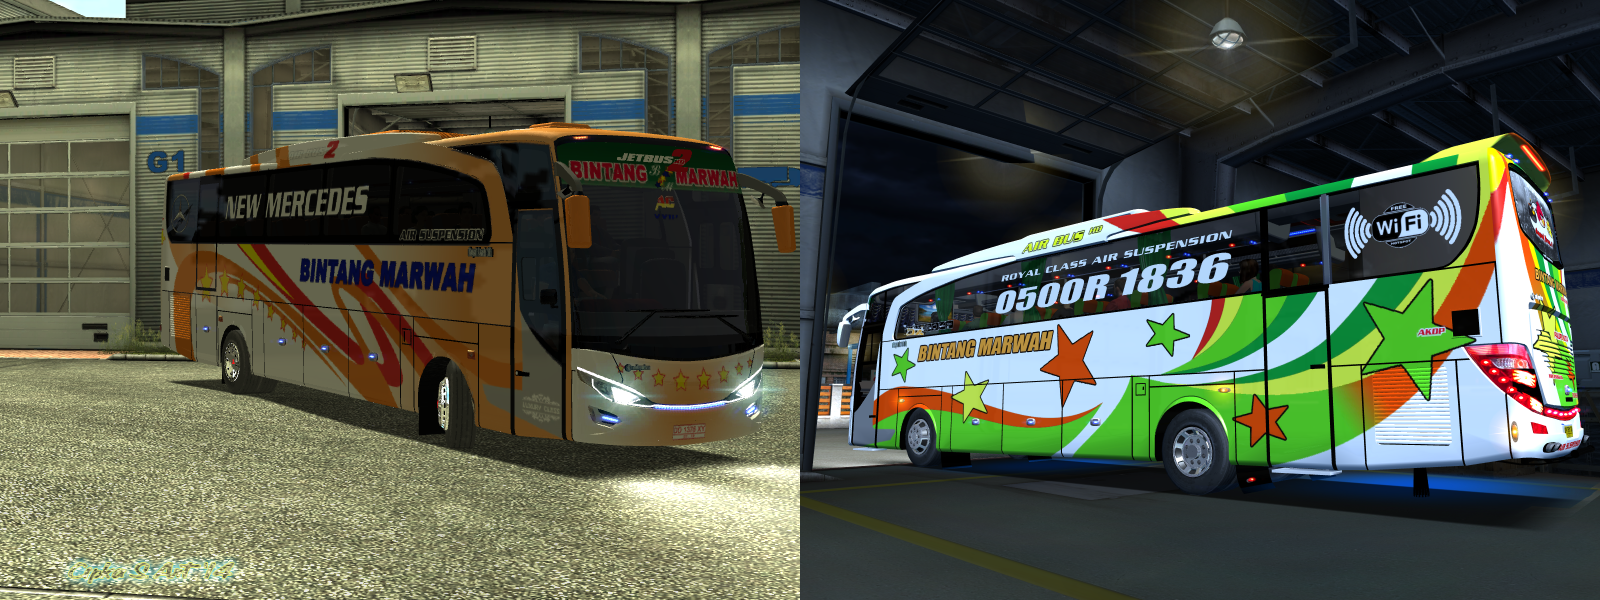 Celebes Livery Bus On Game